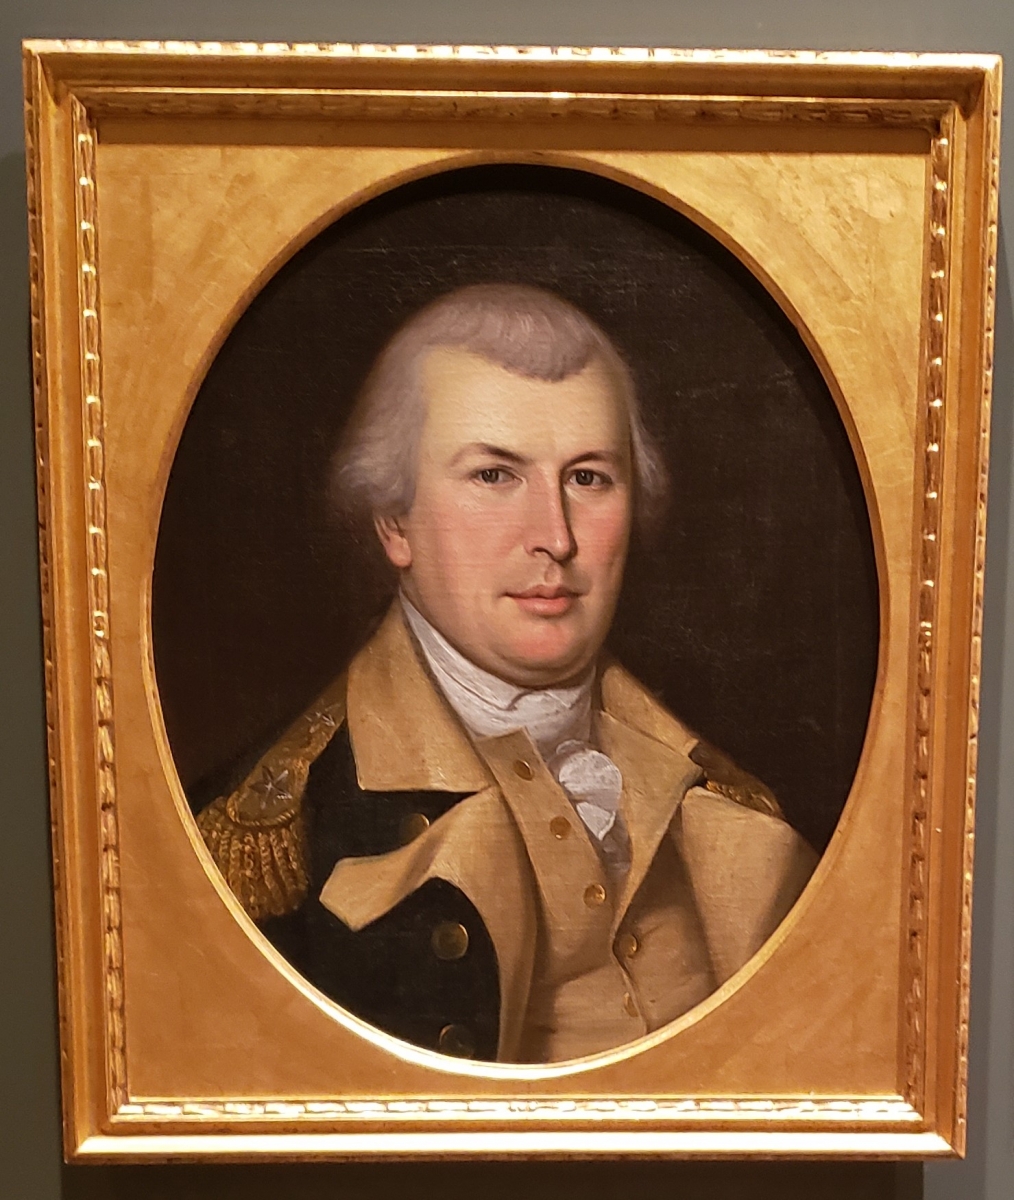 Nathanael Greene Portrait located in the Second Bank of the United States Portrait Gallery